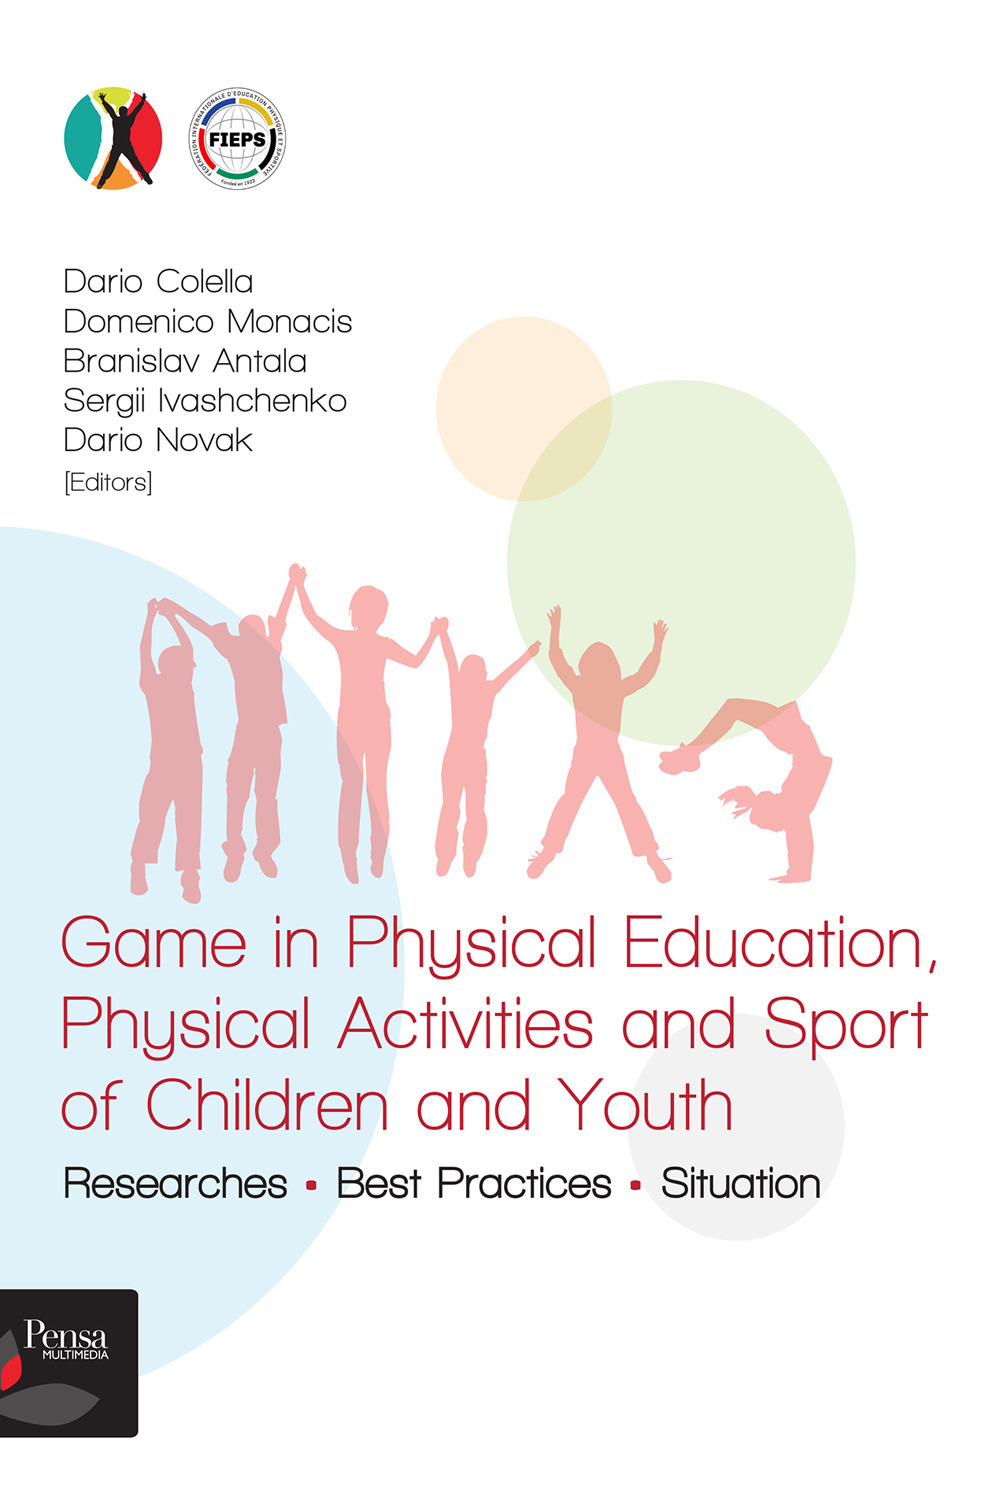 Game in Physical Education, Physical Activities and Sport of Children and Youth. Researches, Best Practices, Situation